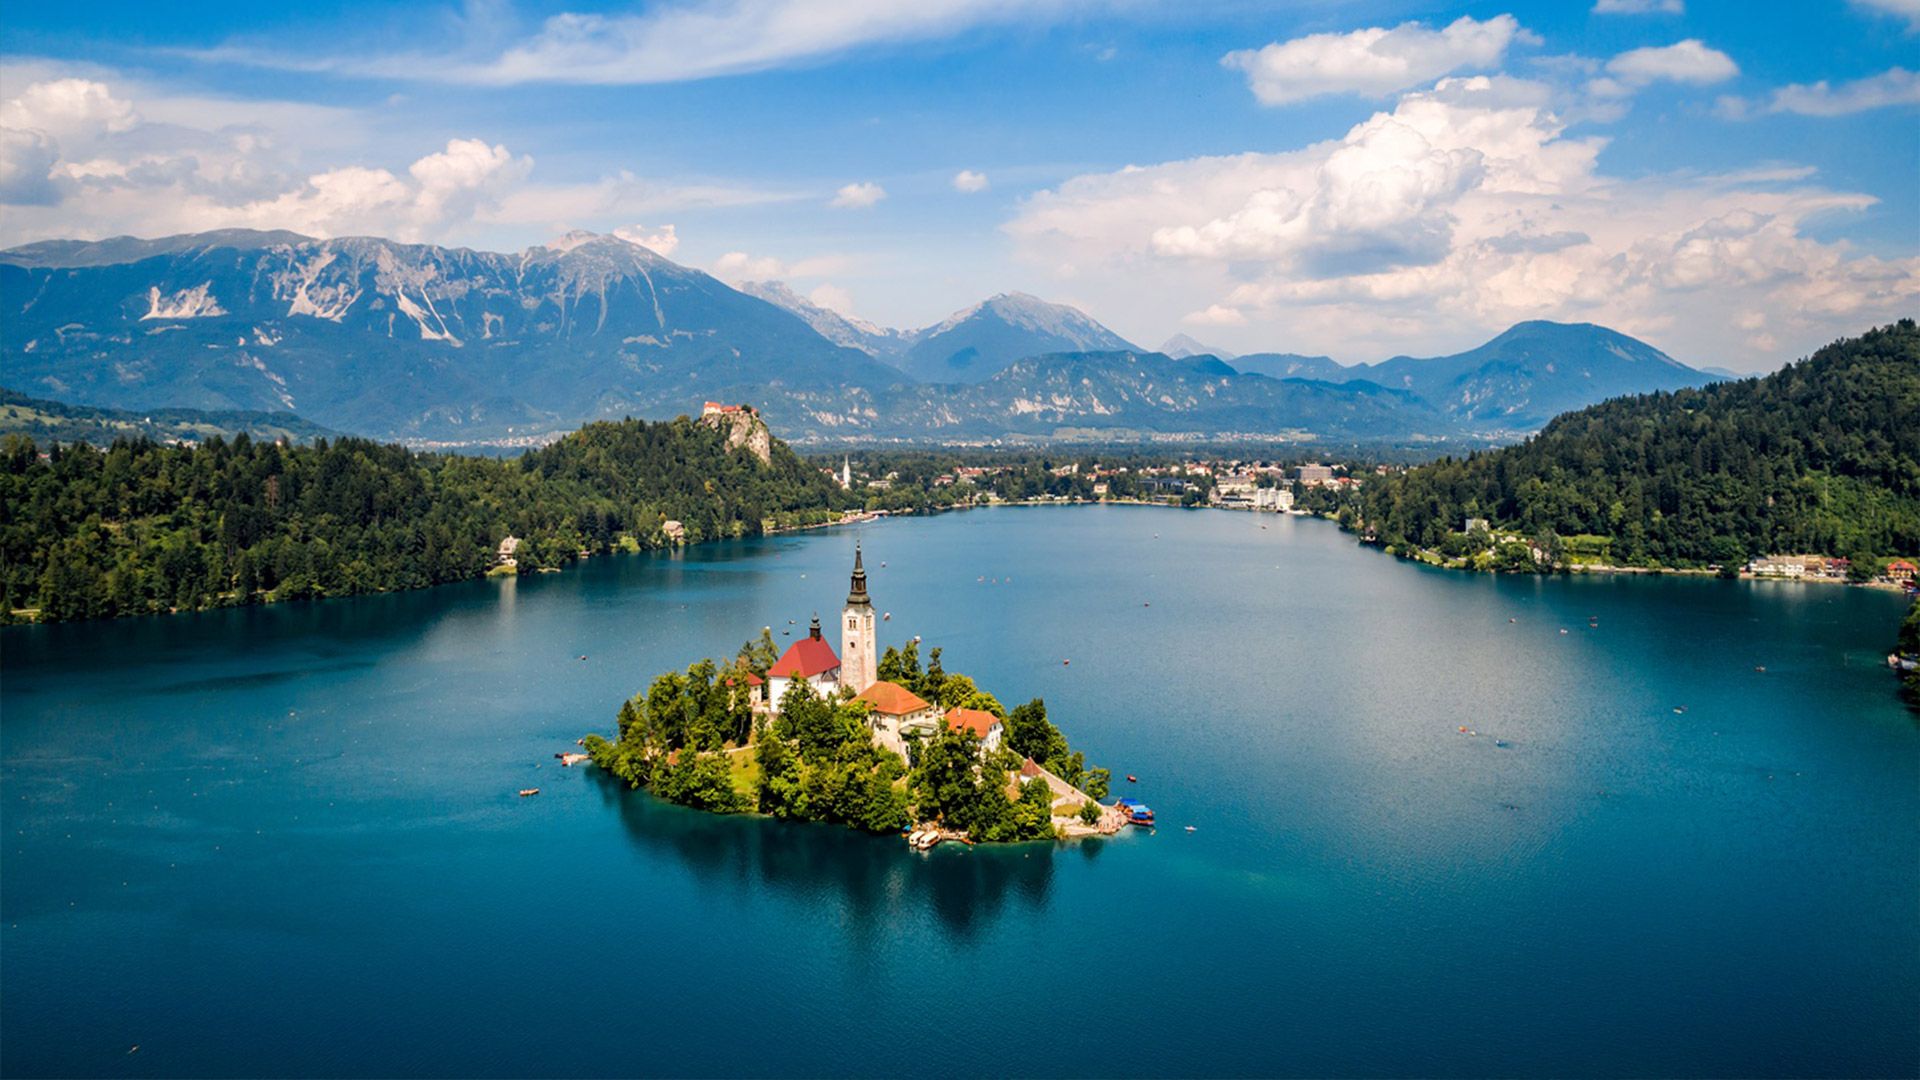 With PayPorter, you can make fast, easy and safe money transfers to Slovenia at the most affordable prices!